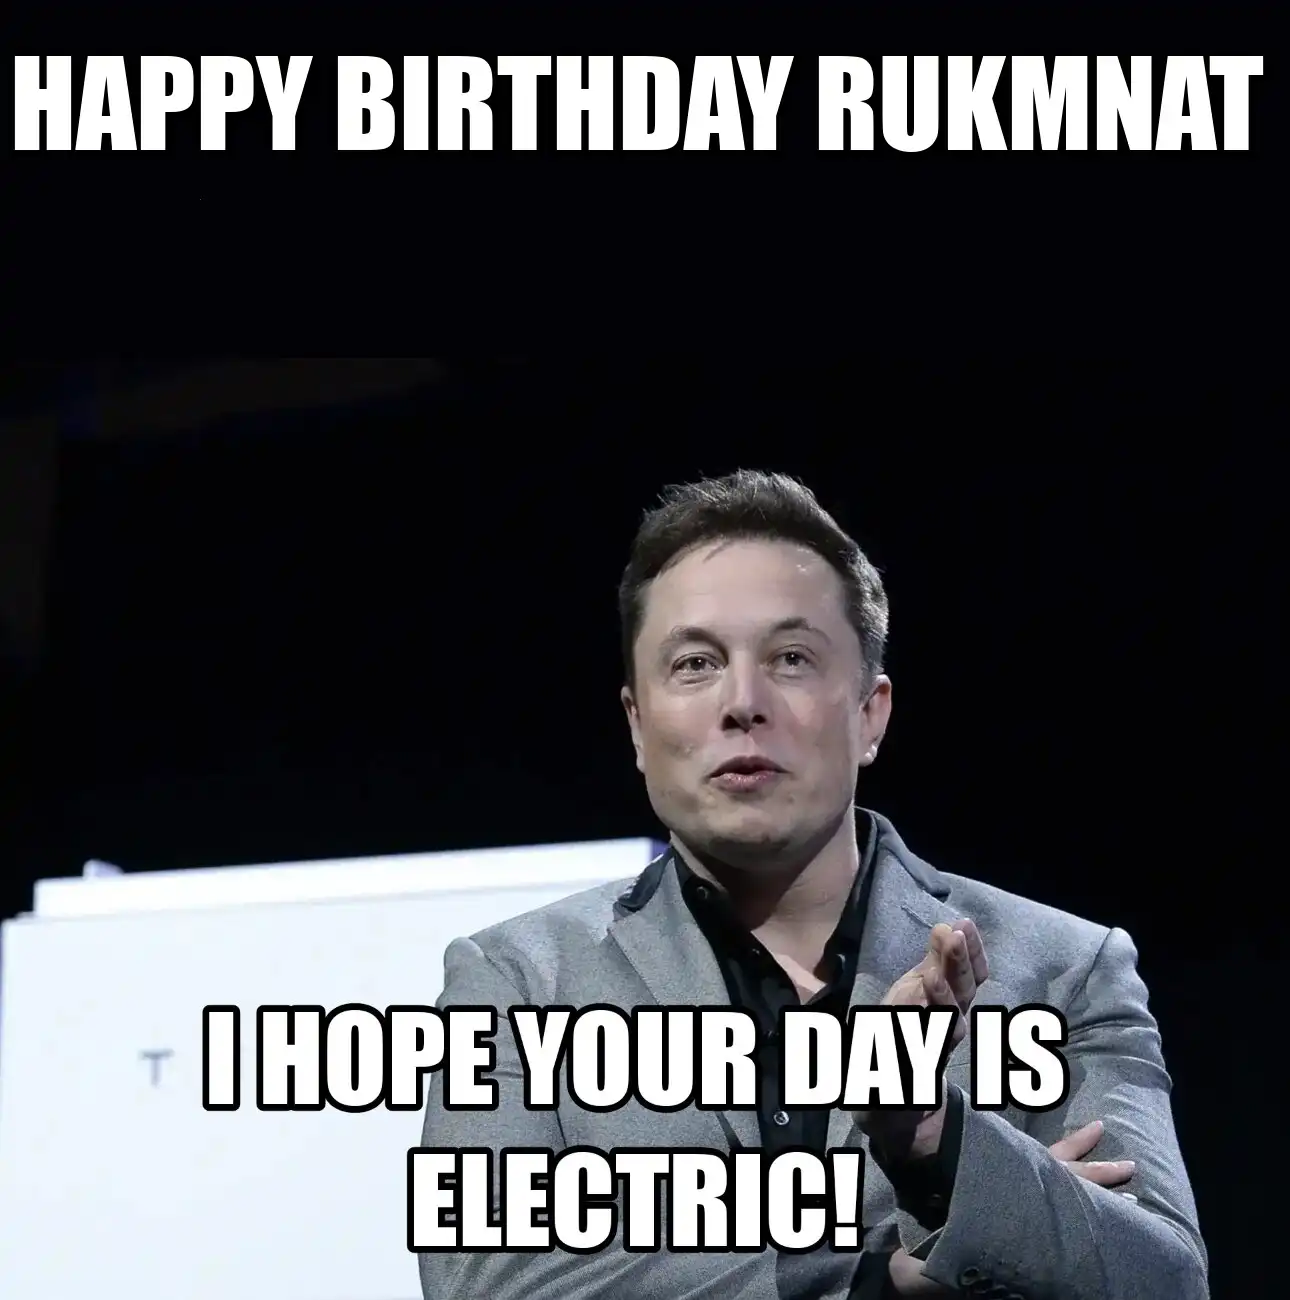 Happy Birthday Rukmnat I Hope Your Day Is Electric Meme